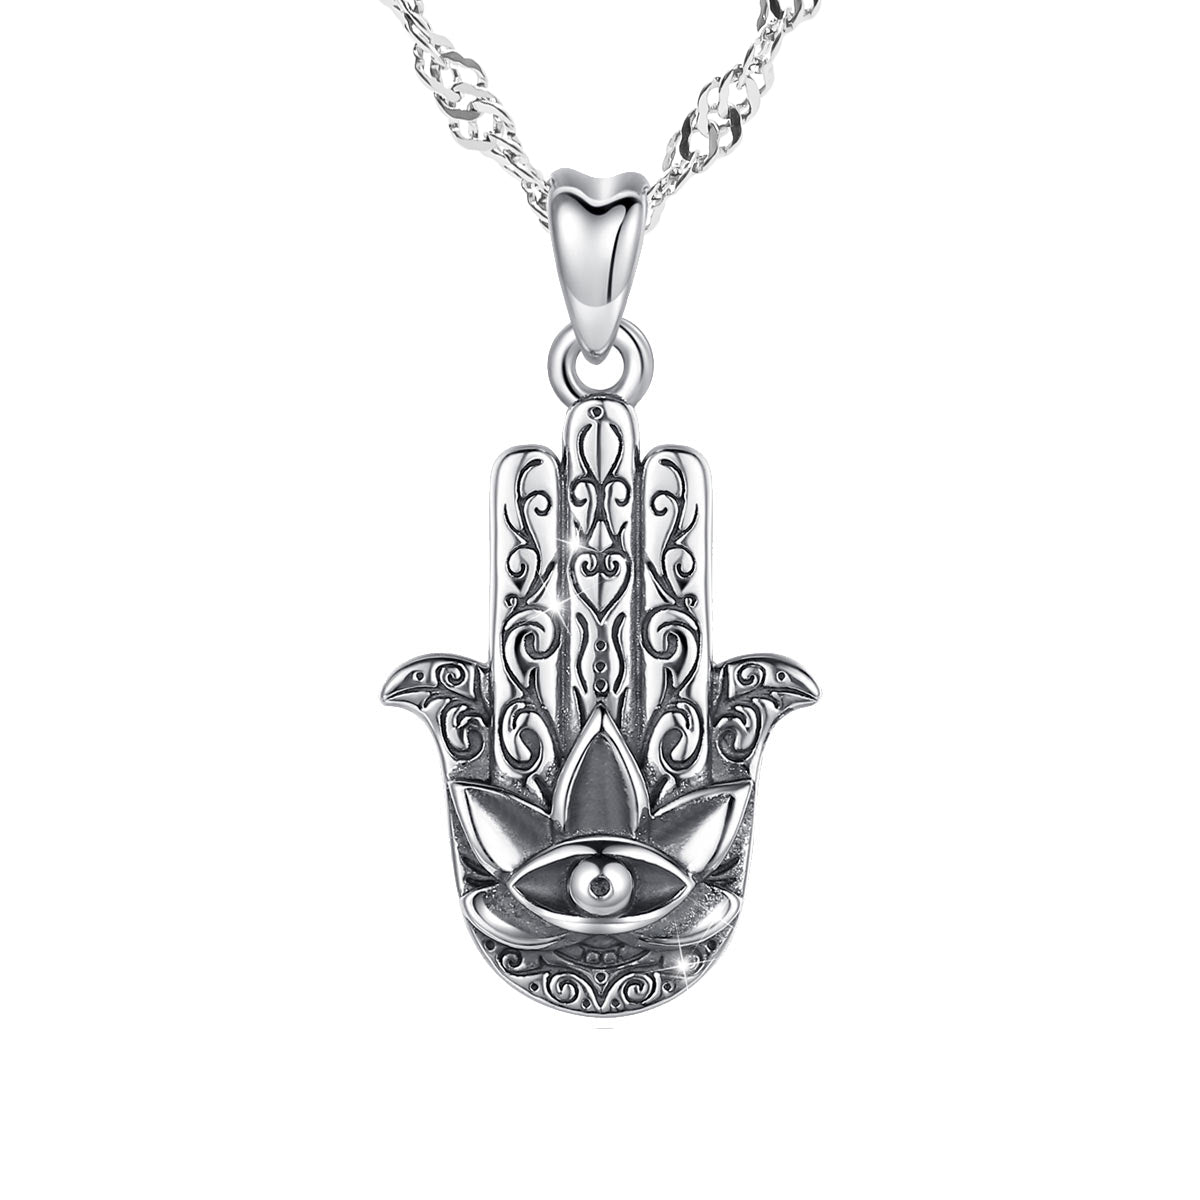 Hamsa Hand Pendant with 925 Sterling Silver Water Wave necklace chain 18"